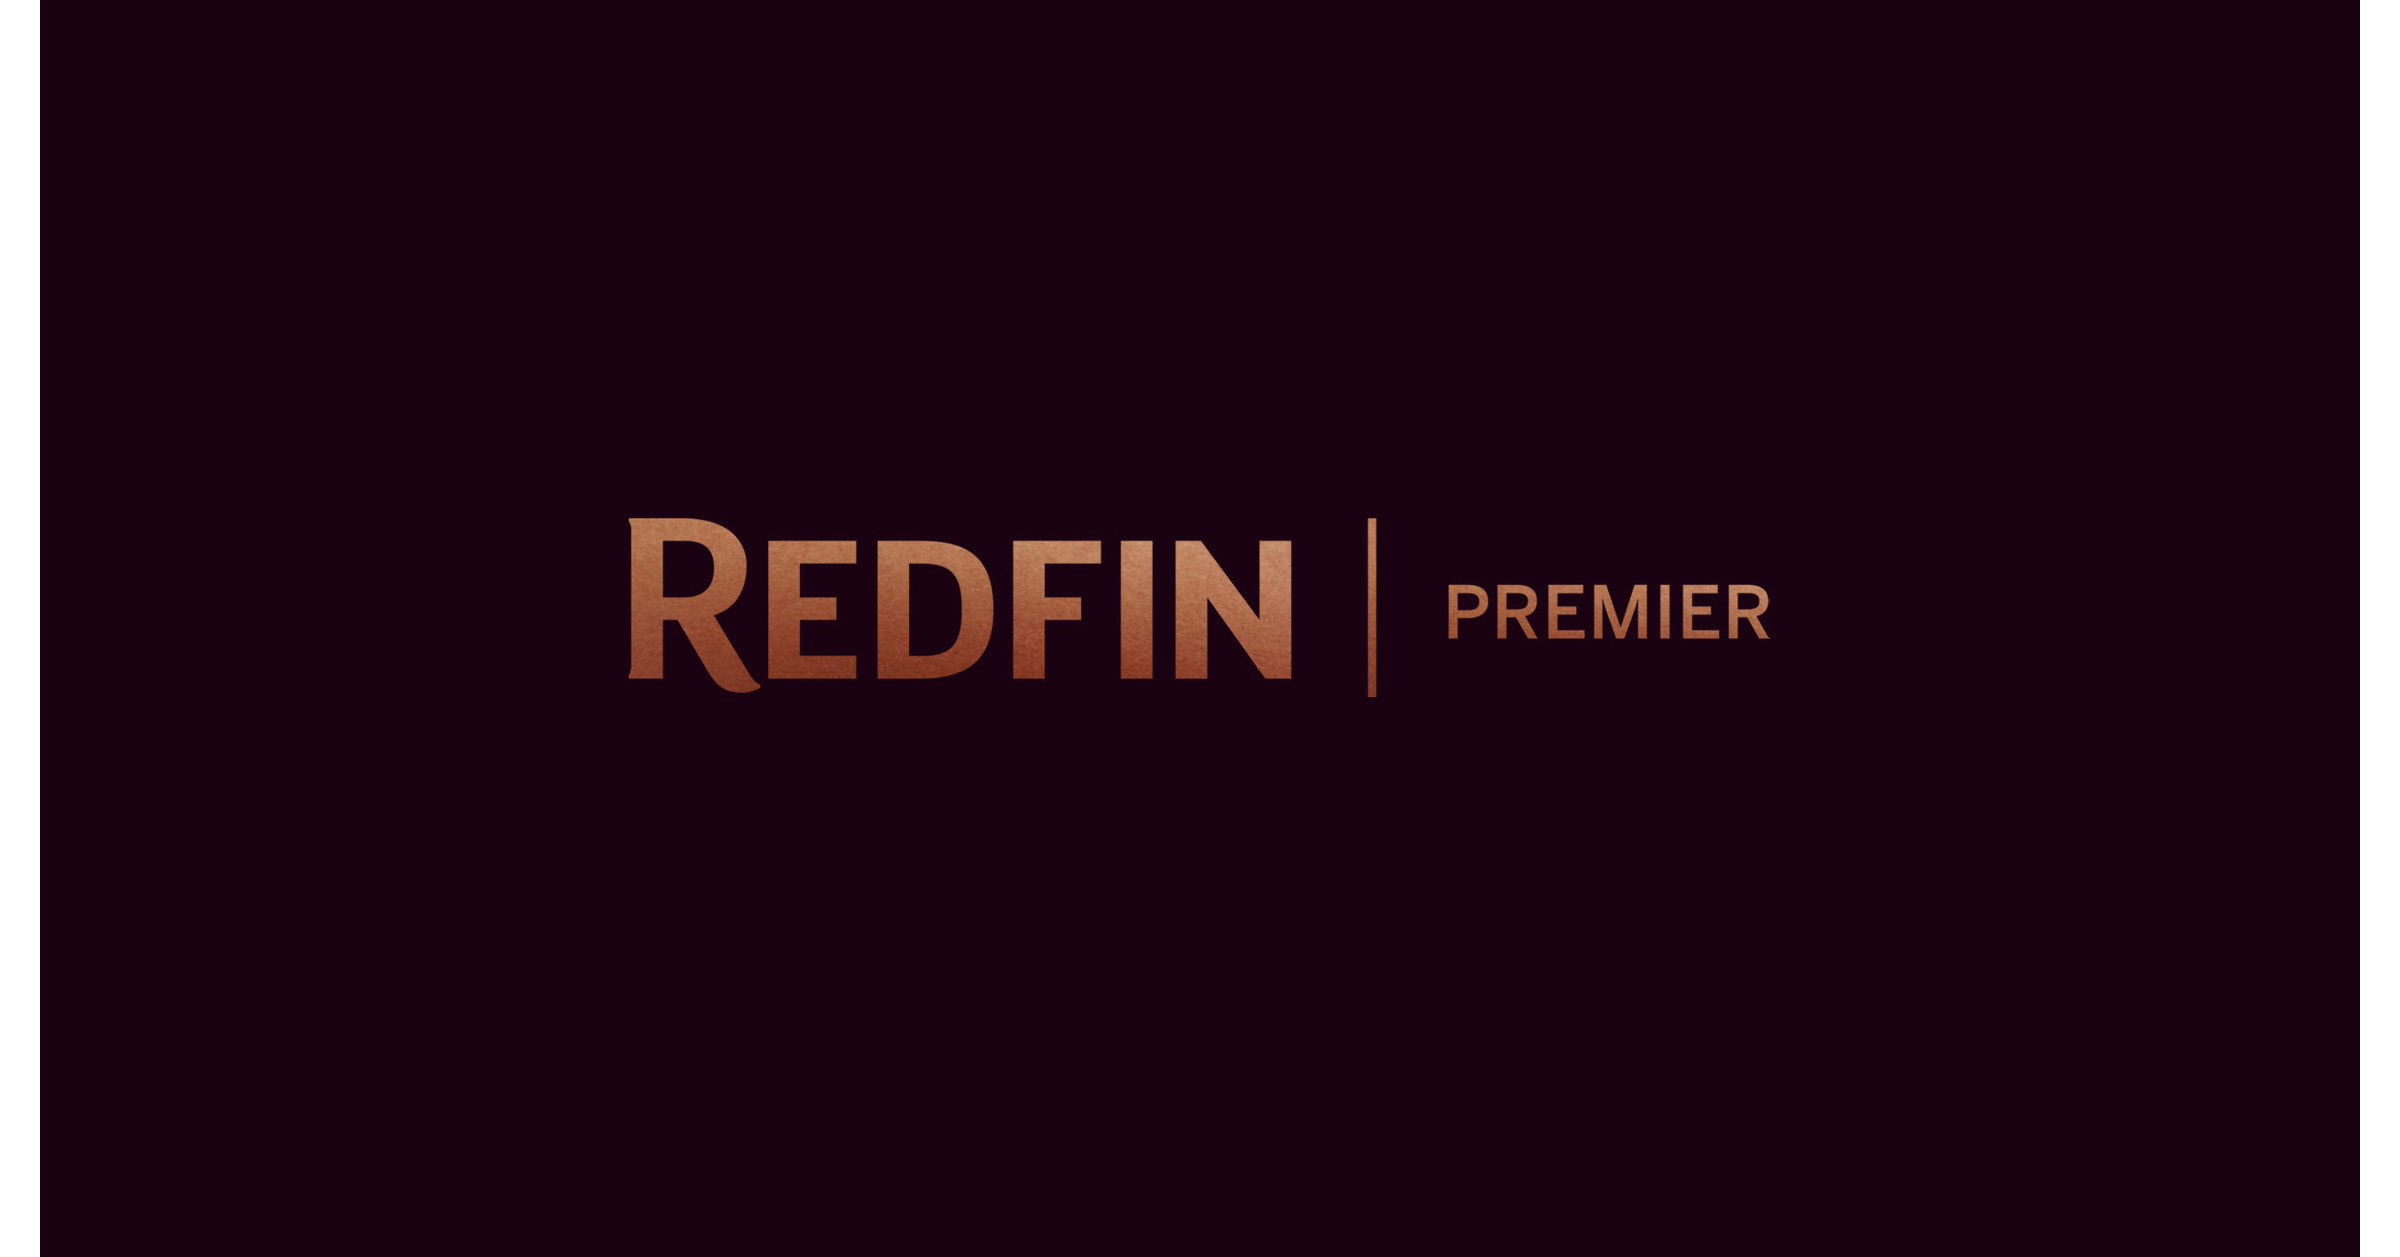 Redfin Premier  The highest level of service from Redfin's best agents